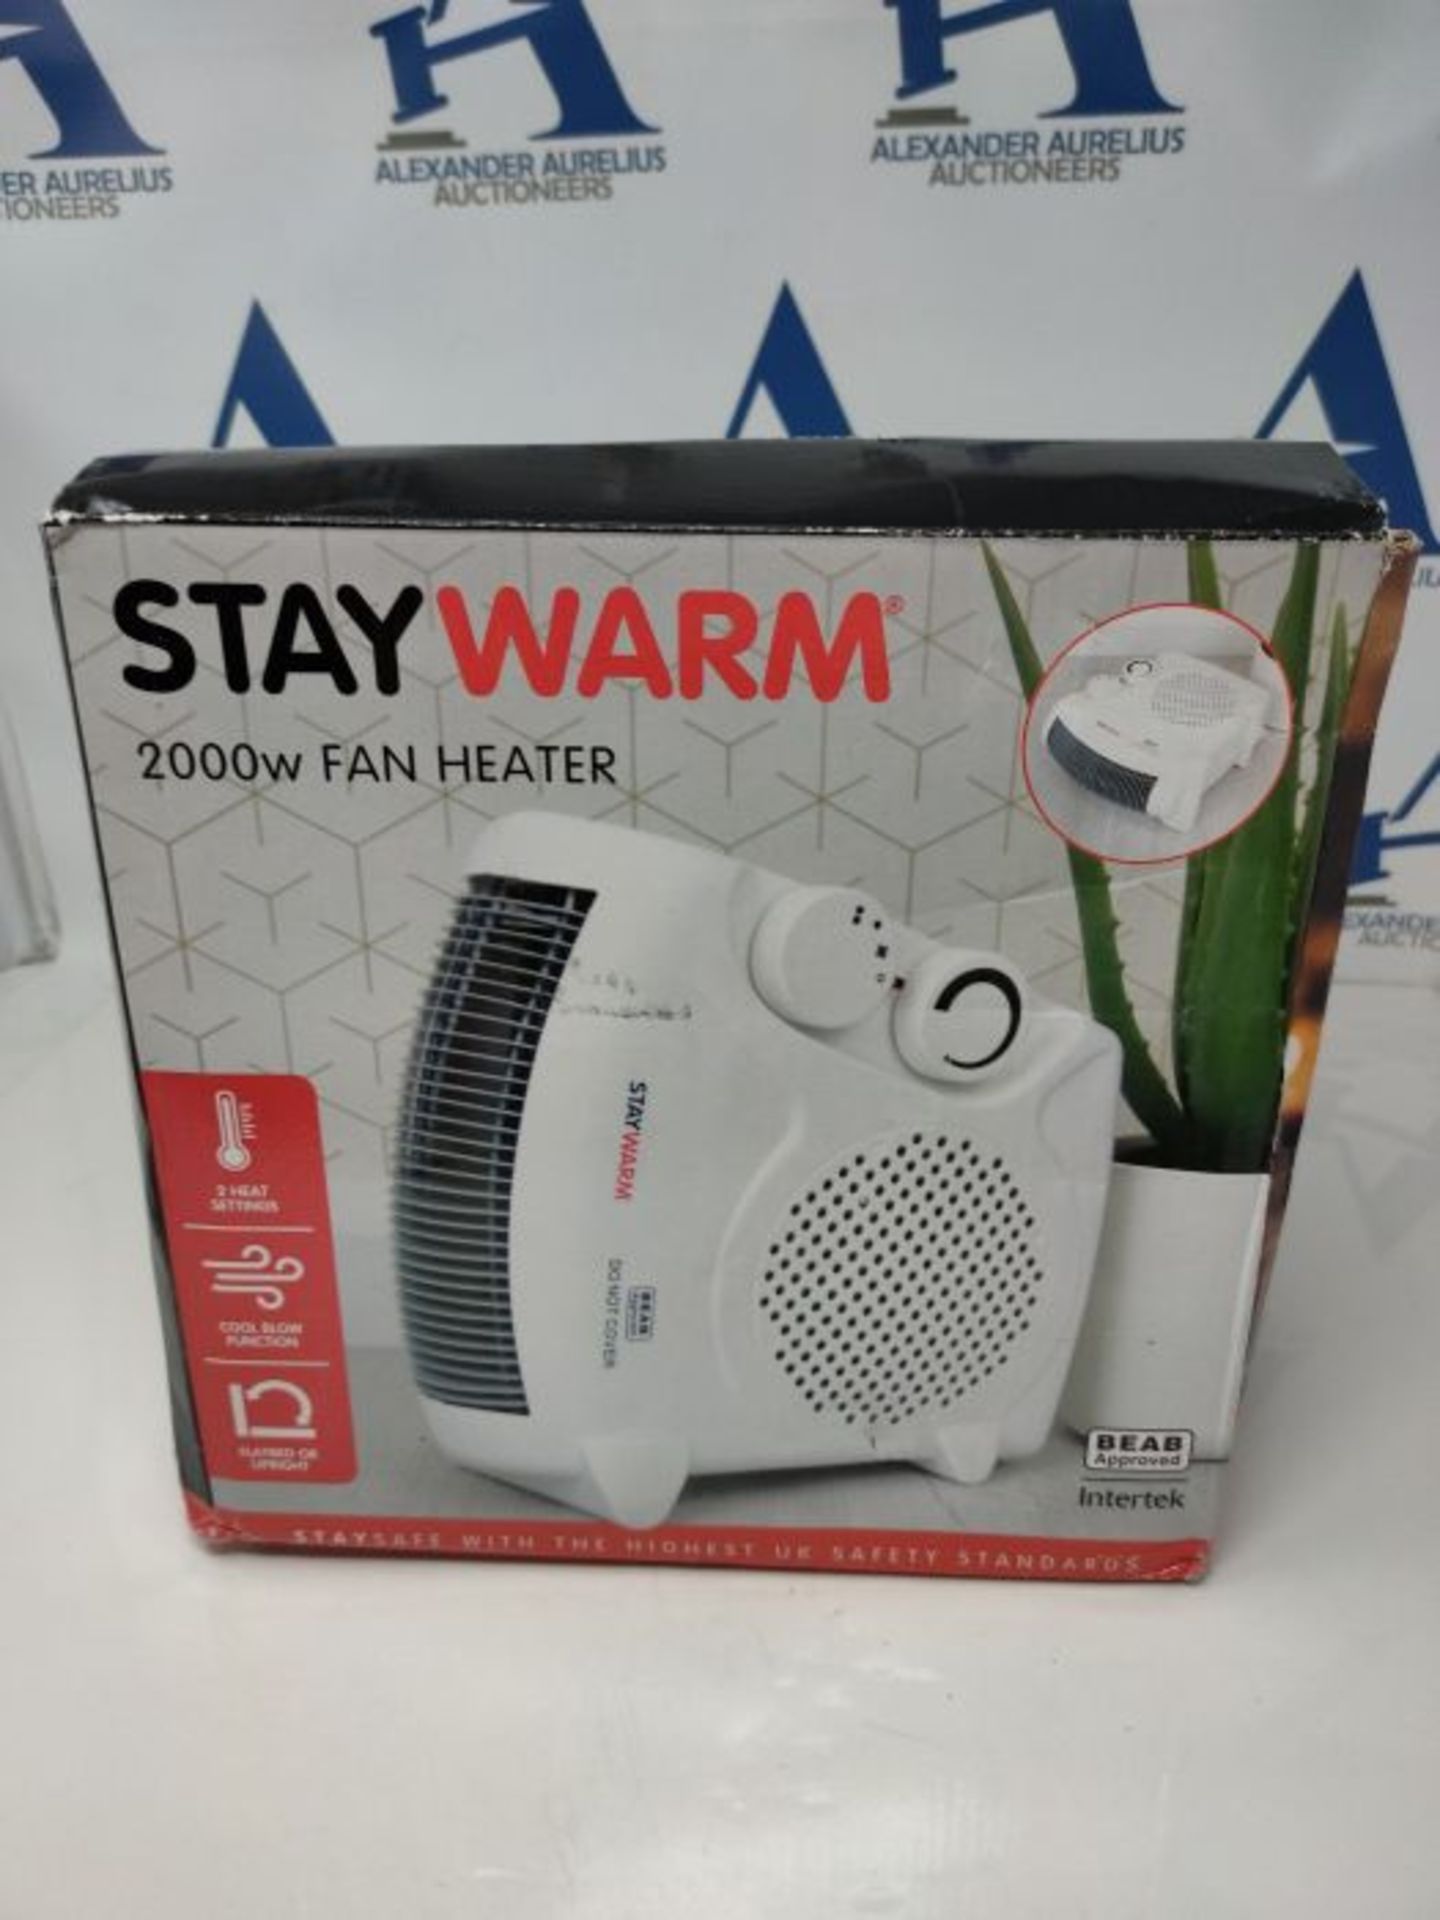 STAYWARM® 2000w Upright and Flatbed Fan Heater with 2 Heat Settings / Cool Blow Fan / - Image 2 of 6